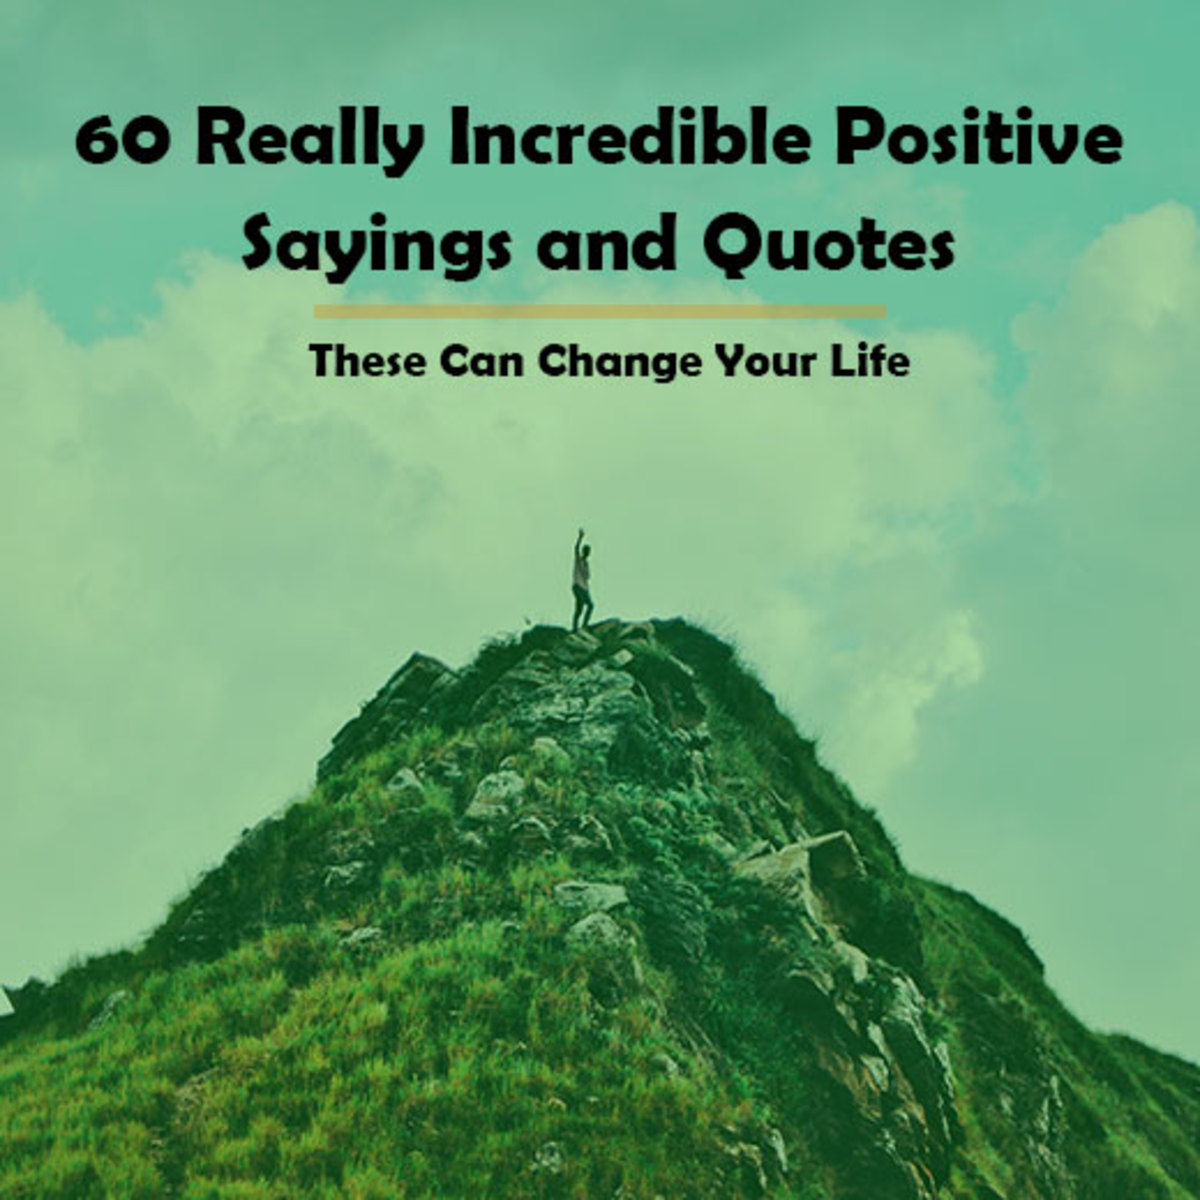 60 Really Incredible Positive Sayings and Quotes These Can Change Your Life